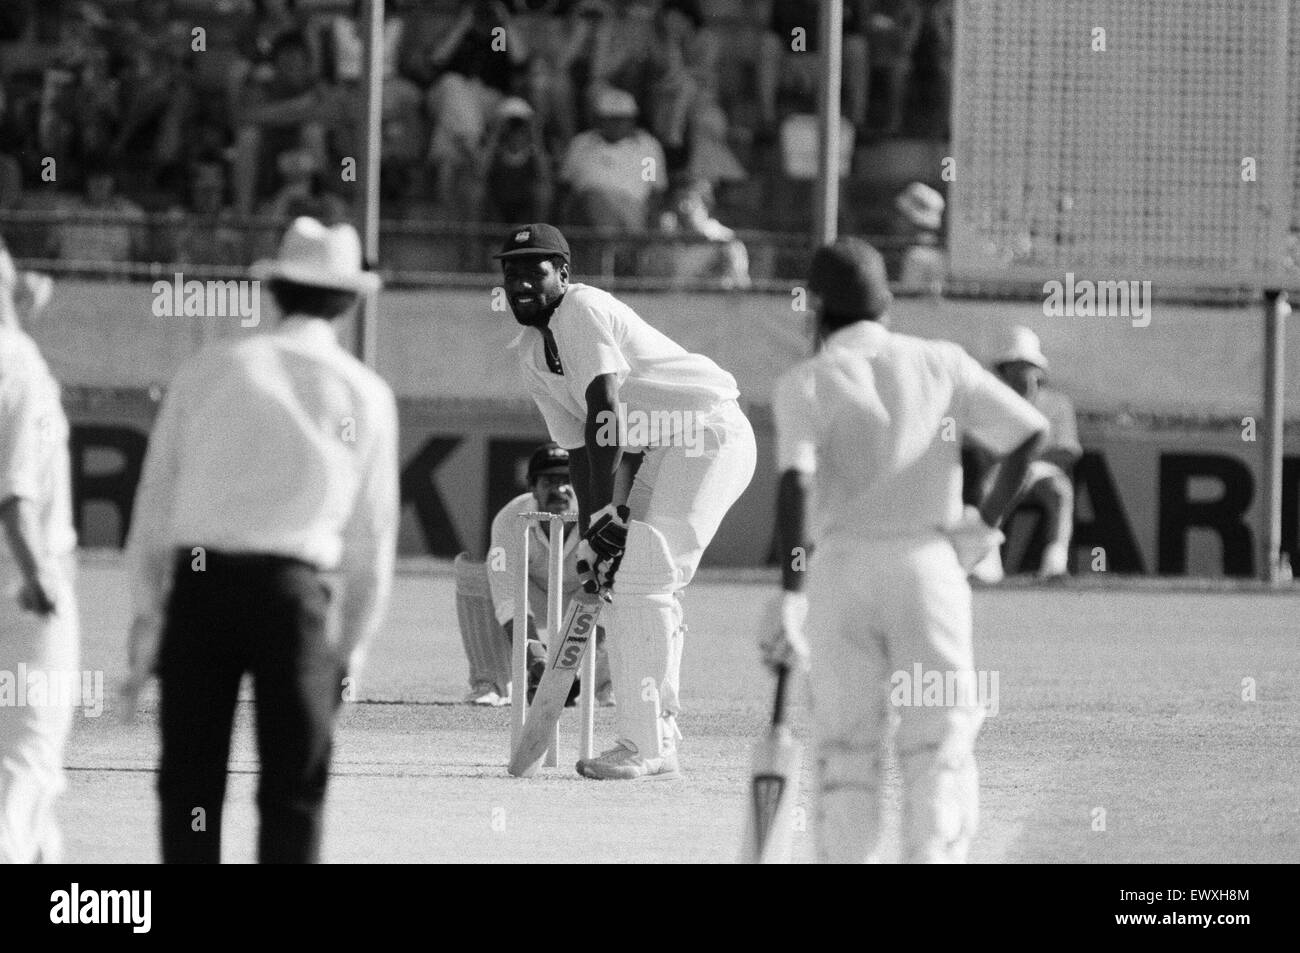 West Indies tour of Australia and New Zealand 1979 - 1980. Australia v West Indies First test match at Brisbane Cricket Ground, Woolloongabba, Brisbane.  Viv Richards in batting action for West indies, waiting for a delivery at the crease. December 1979. Stock Photo